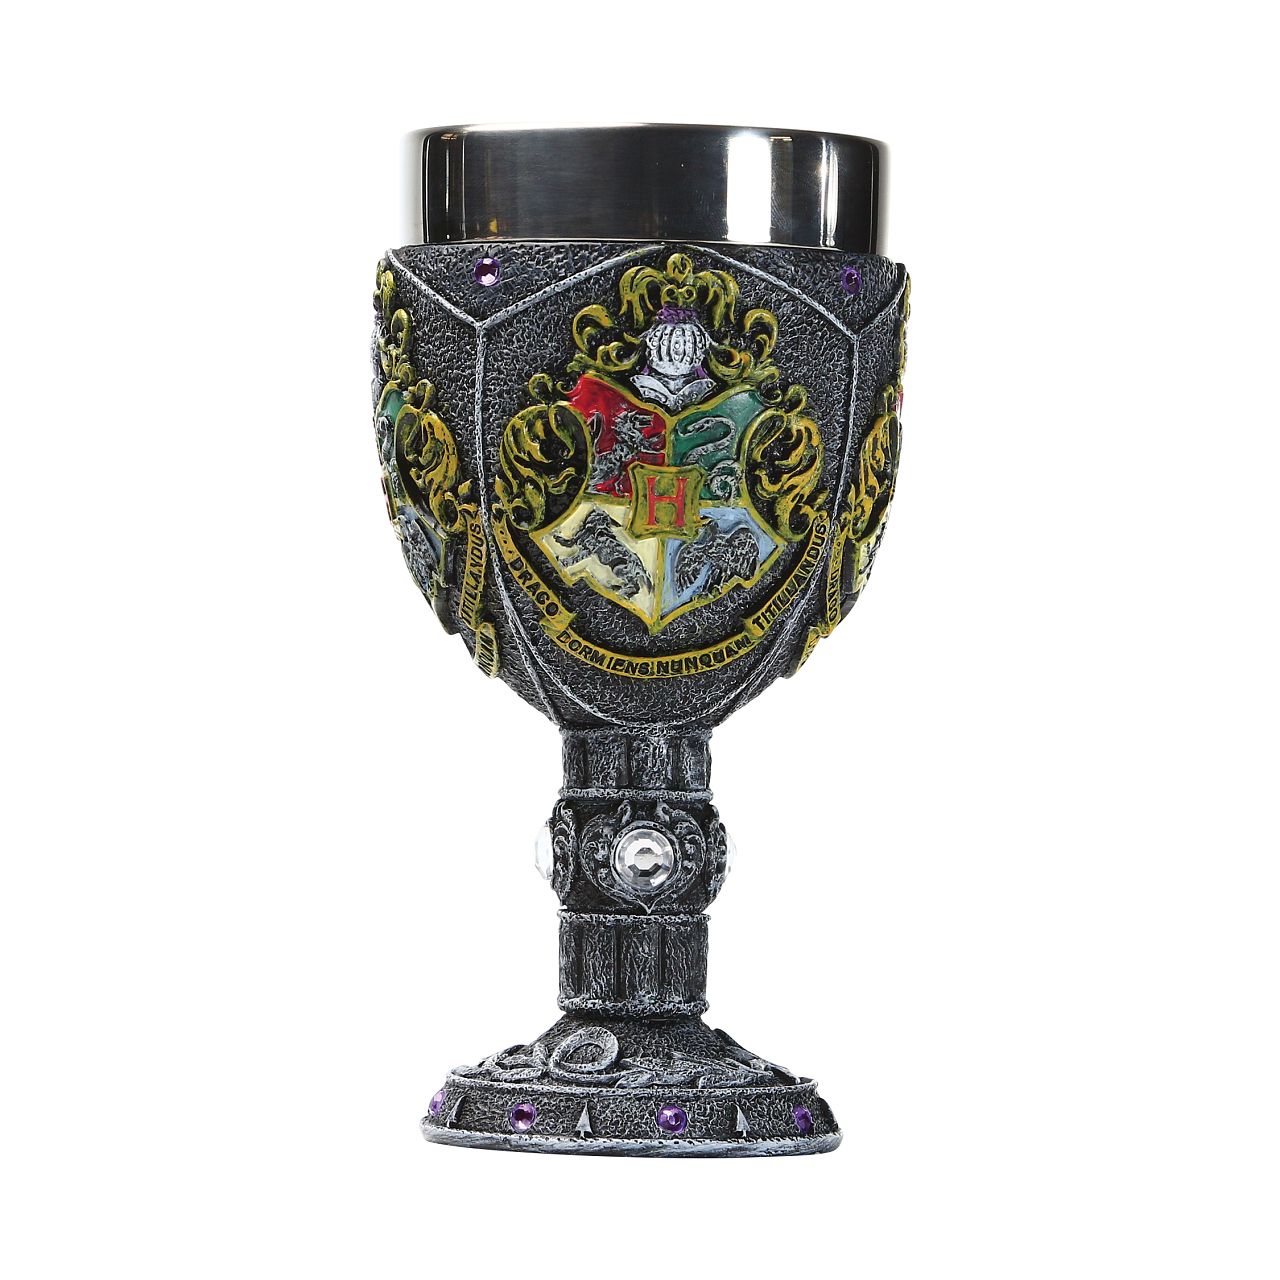 Hogwarts Decorative Goblet  Founded by the four greatest wizards of their time, Hogwarts School of Witchcraft and Wizardry has long been the pinnacle of magical learning. Show your school spirit with this elegant decorative goblet. Stainless steel rim.